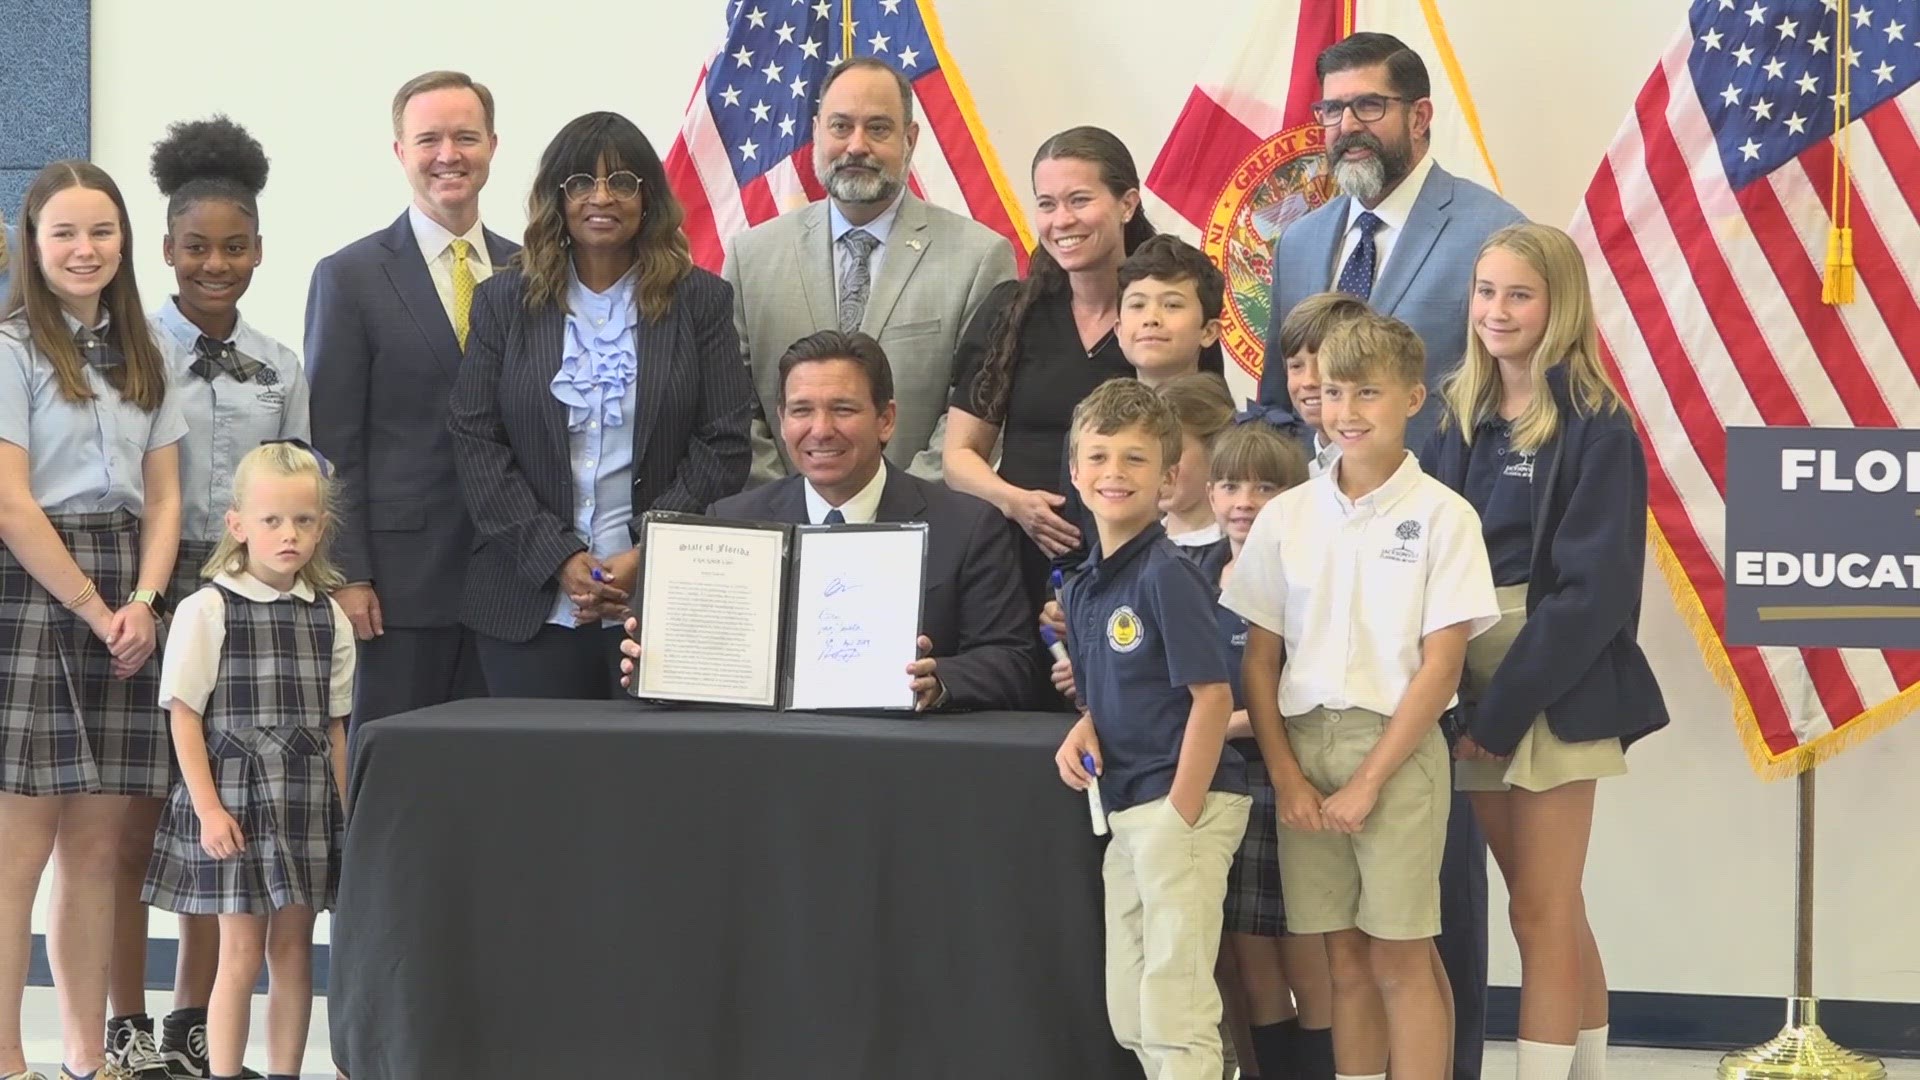 DeSantis signed House Bill 1285 in Jacksonville on Tuesday limiting book objections for those without children in the district to one objection per month.